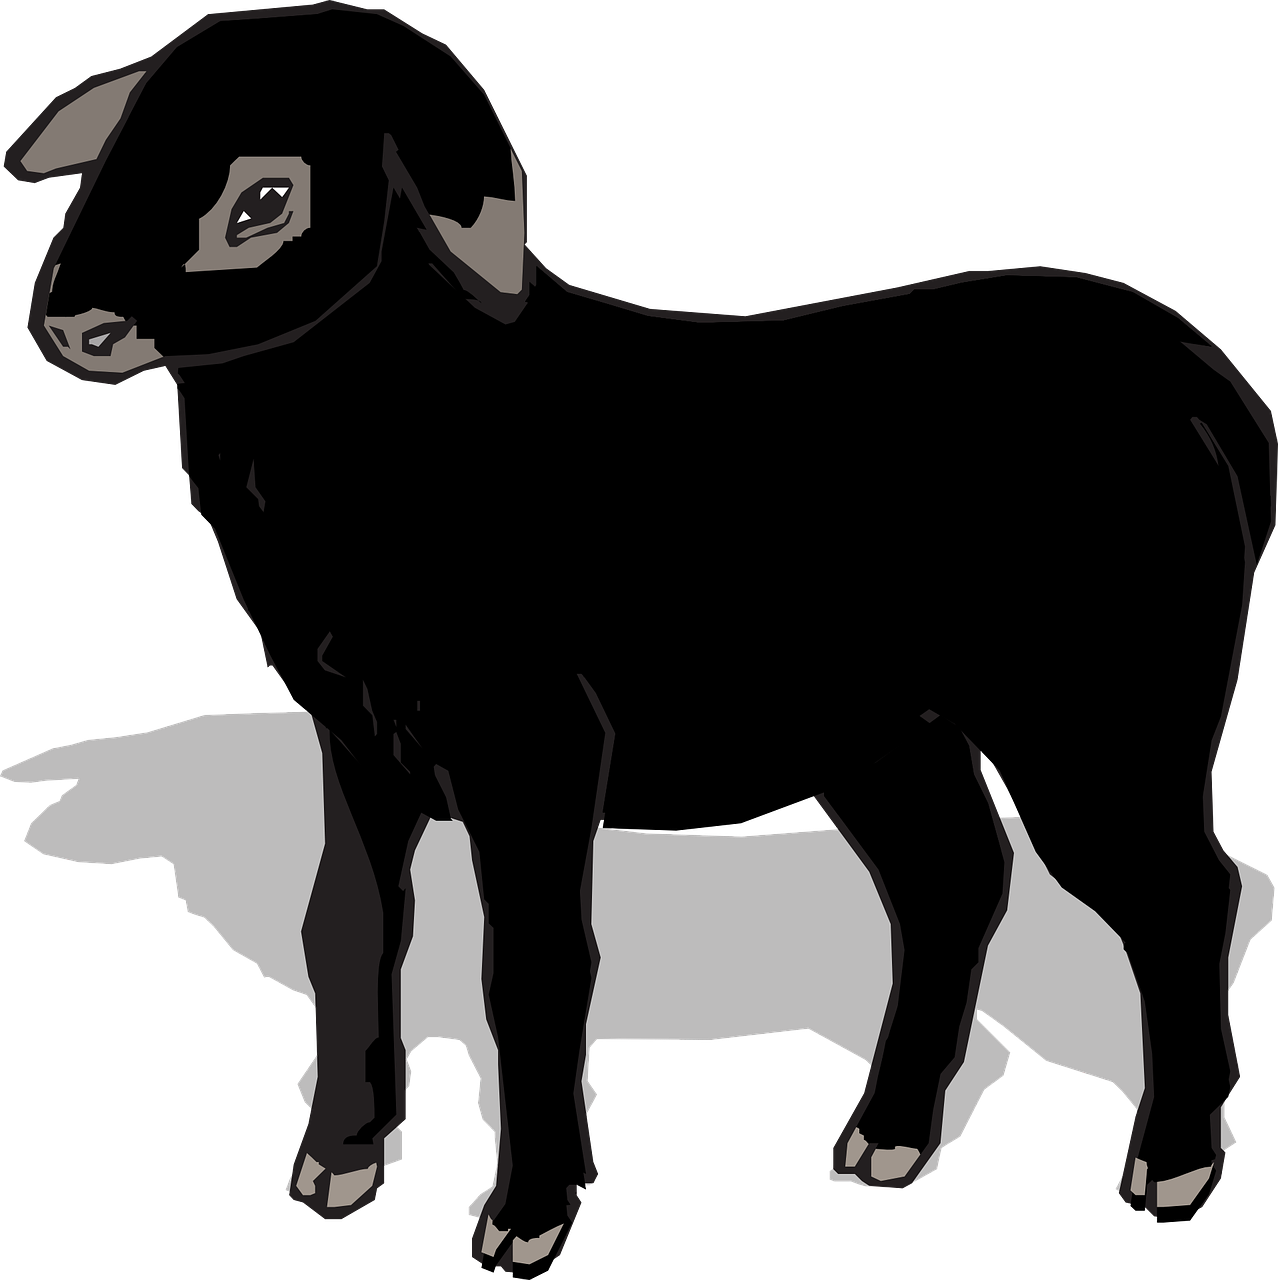 Sheep Black PNG Image High Quality Clipart